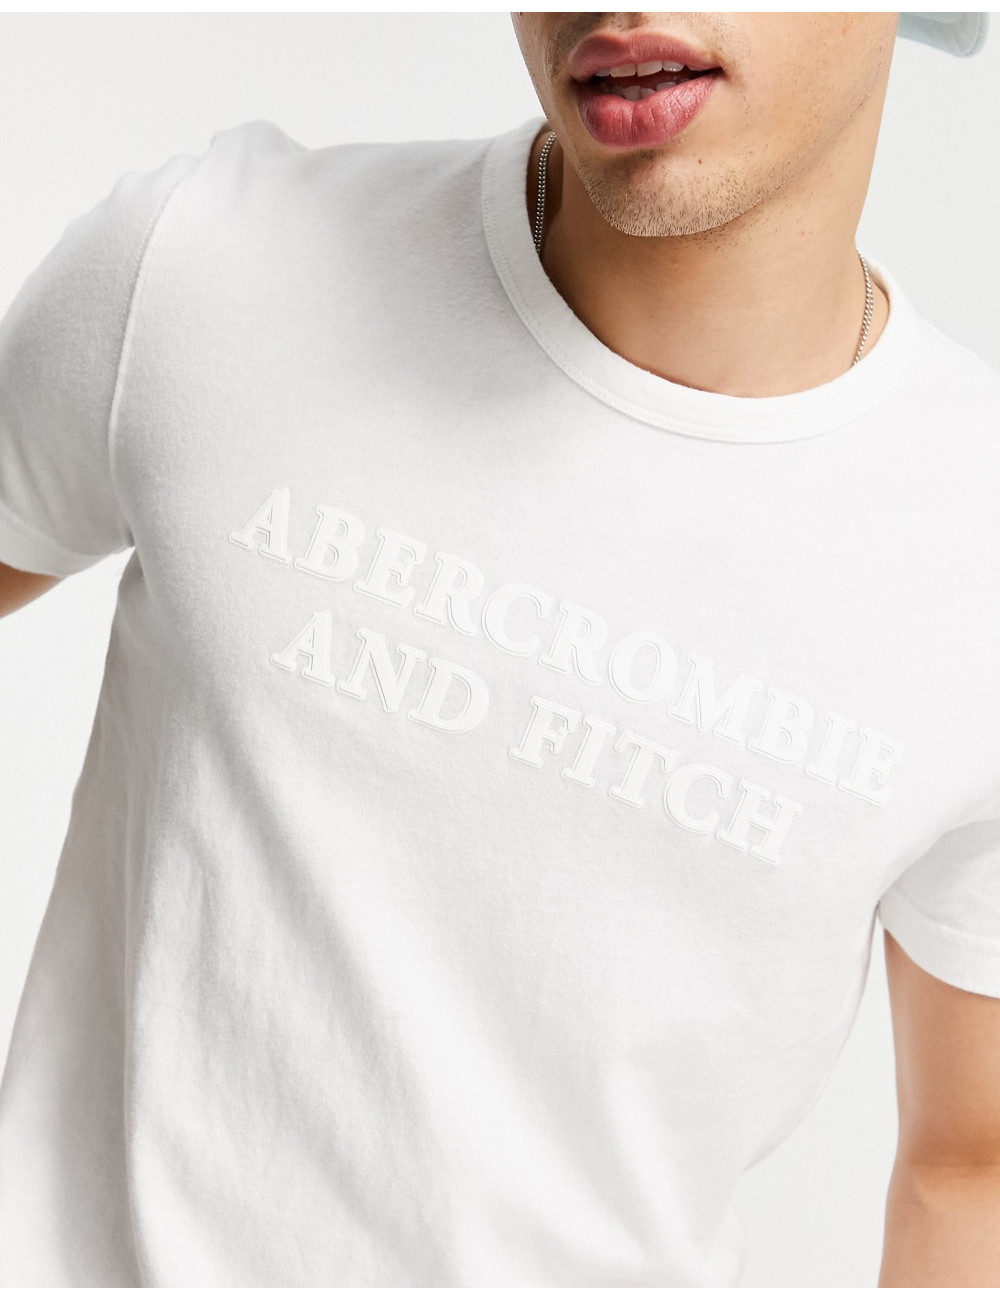 Abercrombie & Fitch tech...